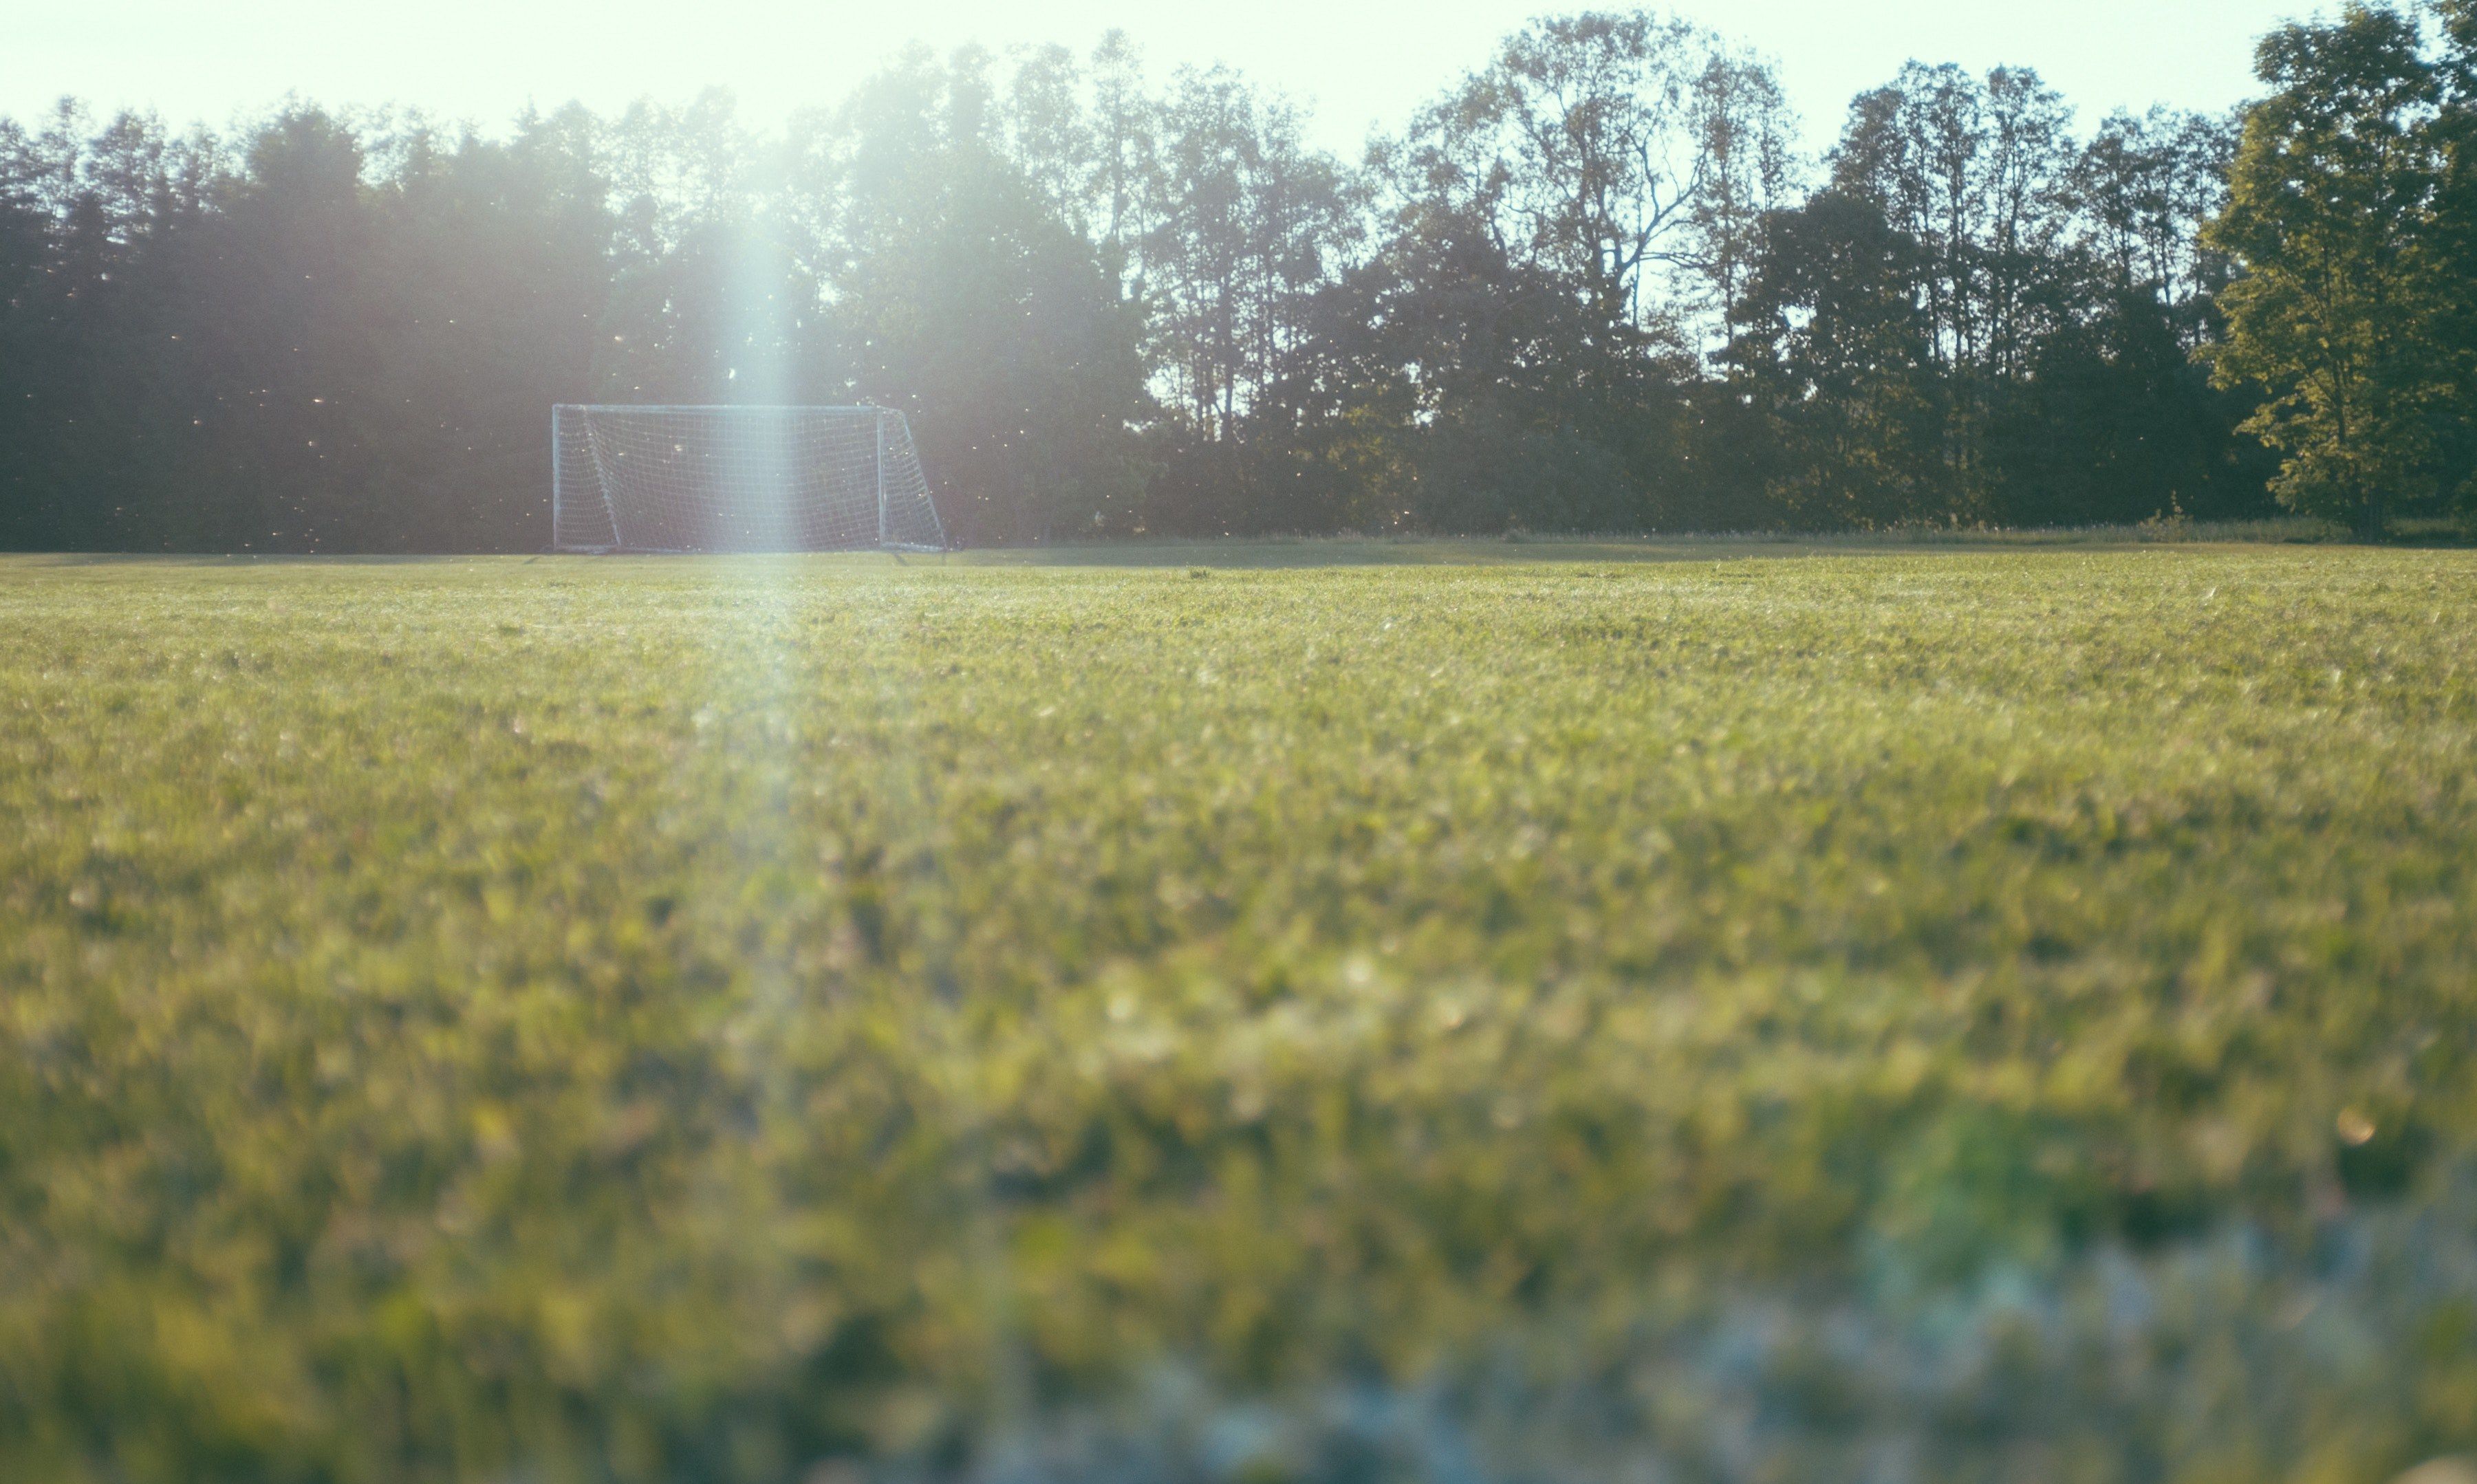 low angle view of a green grass field with a soccer goal by